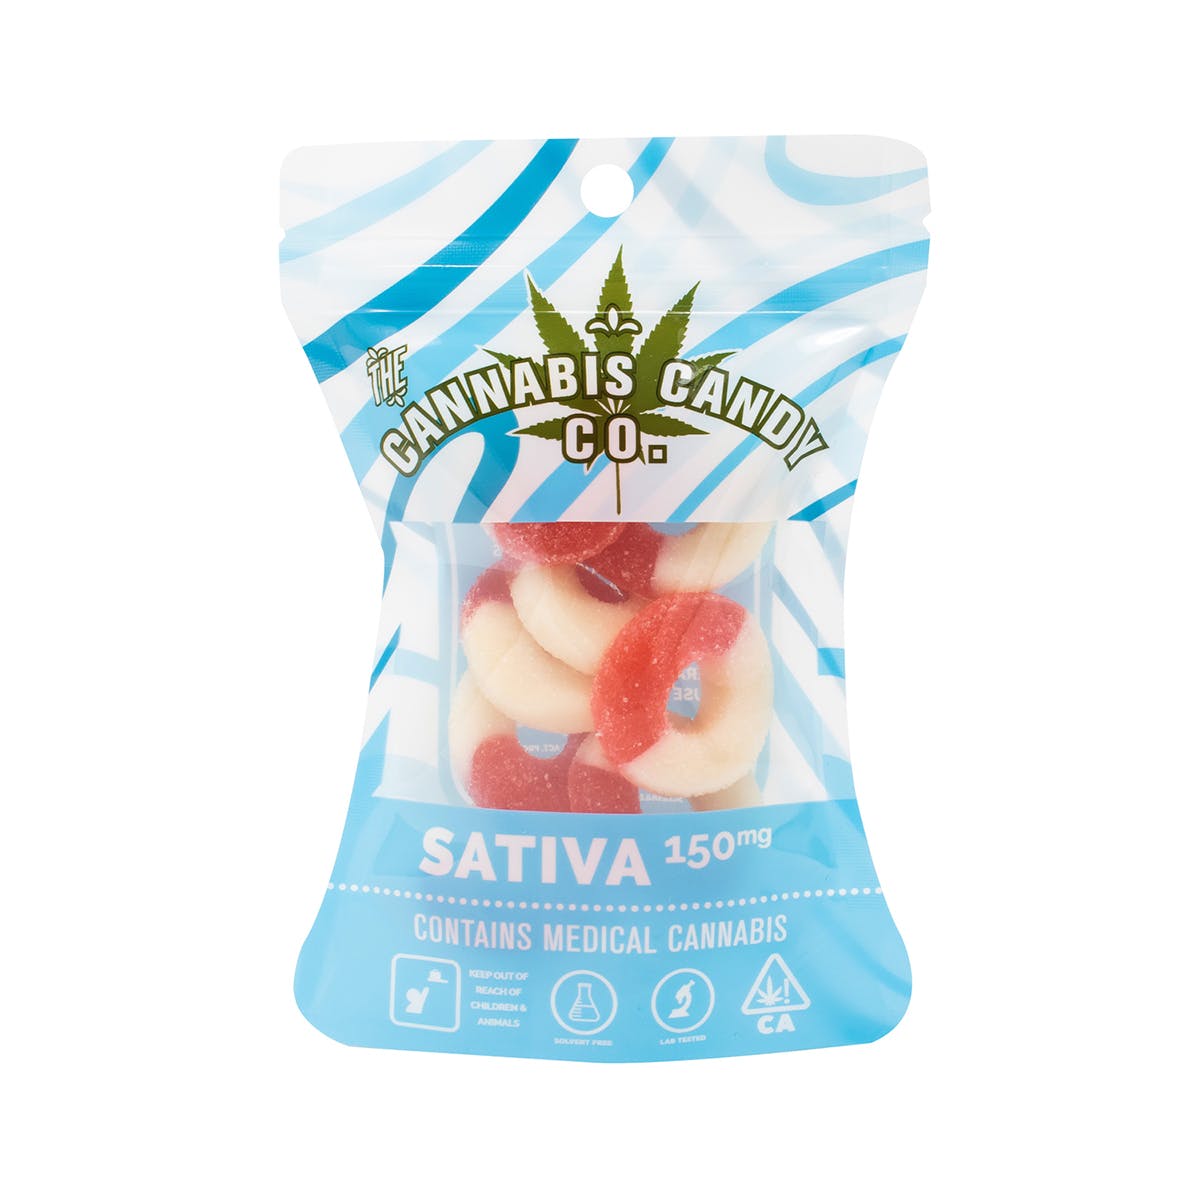 edible-the-cannabis-candy-co-rings-watermelon-150mg-sativa